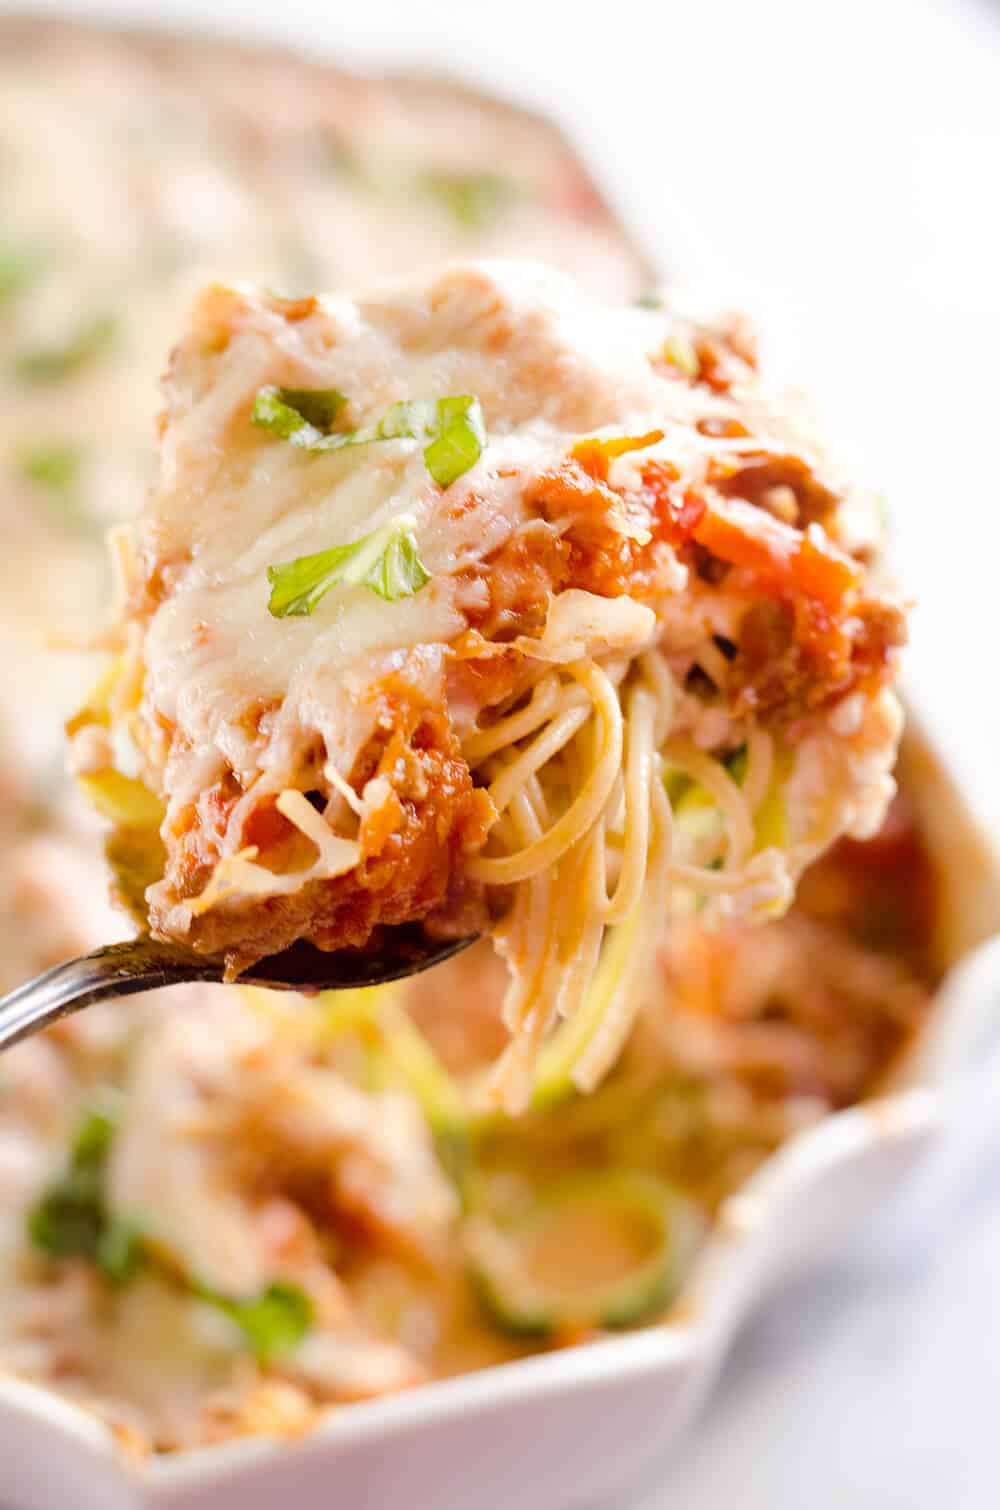 Light Turkey Noodle Casserole is a hearty and healthy dinner idea the whole family will love! All of the traditional flavors of noodle casserole are lightened up with whole wheat spaghetti, zucchini noodles and lean ground turkey.